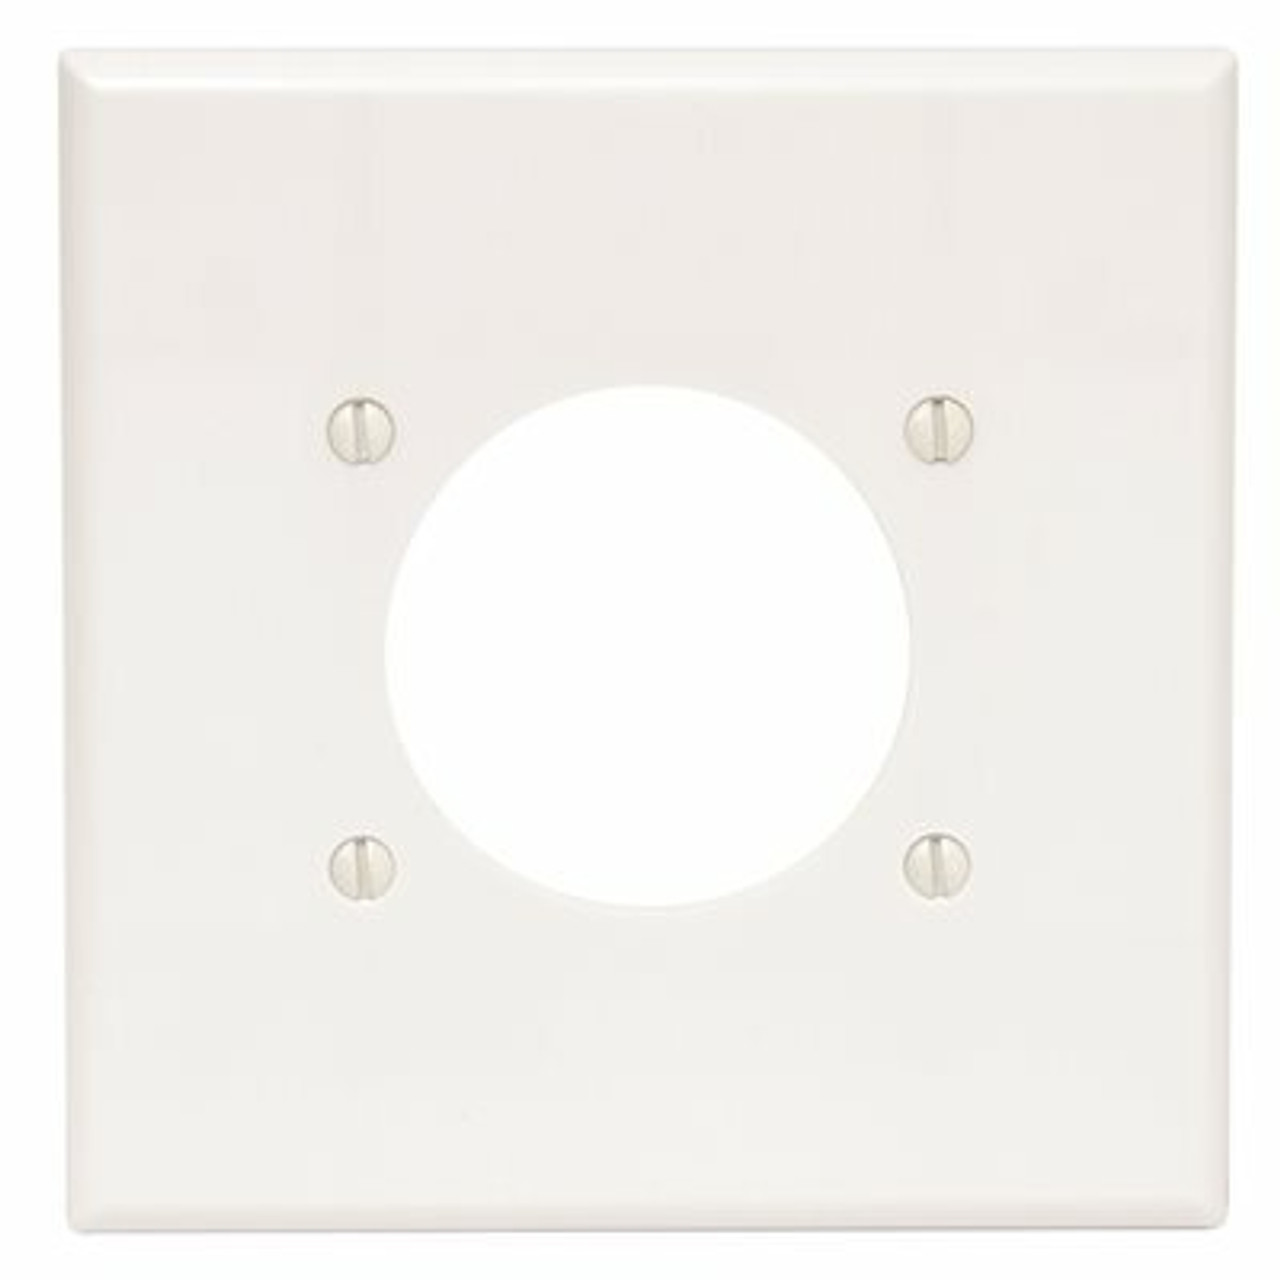 Leviton White 2-Gang Single Outlet Wall Plate (1-Pack)